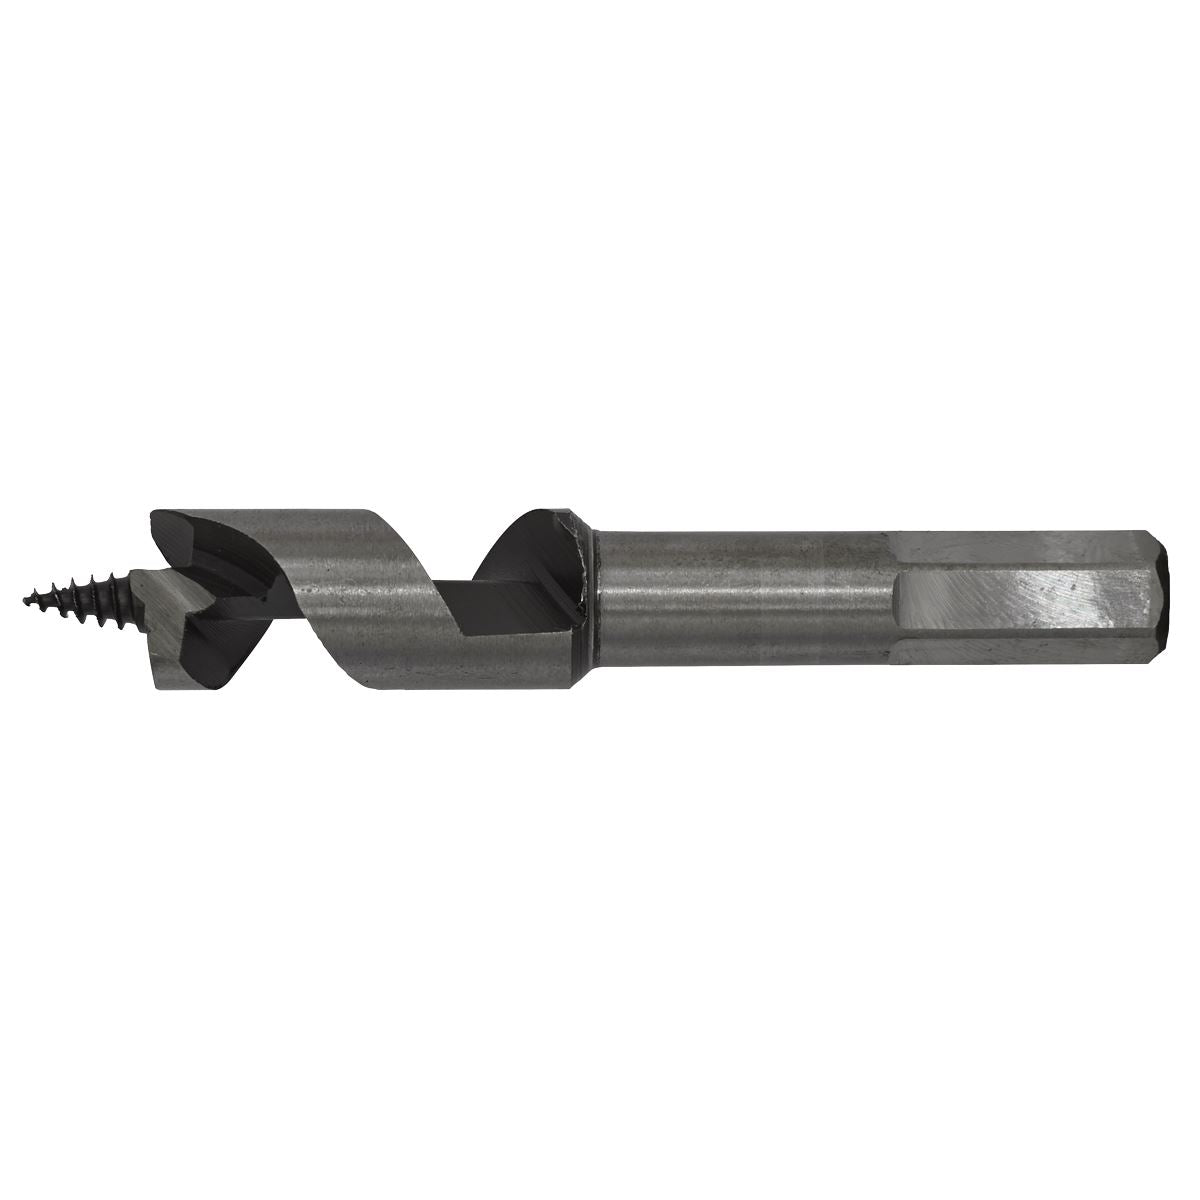 Worksafe by Sealey Auger Wood Drill Bit 16mm x 100mm